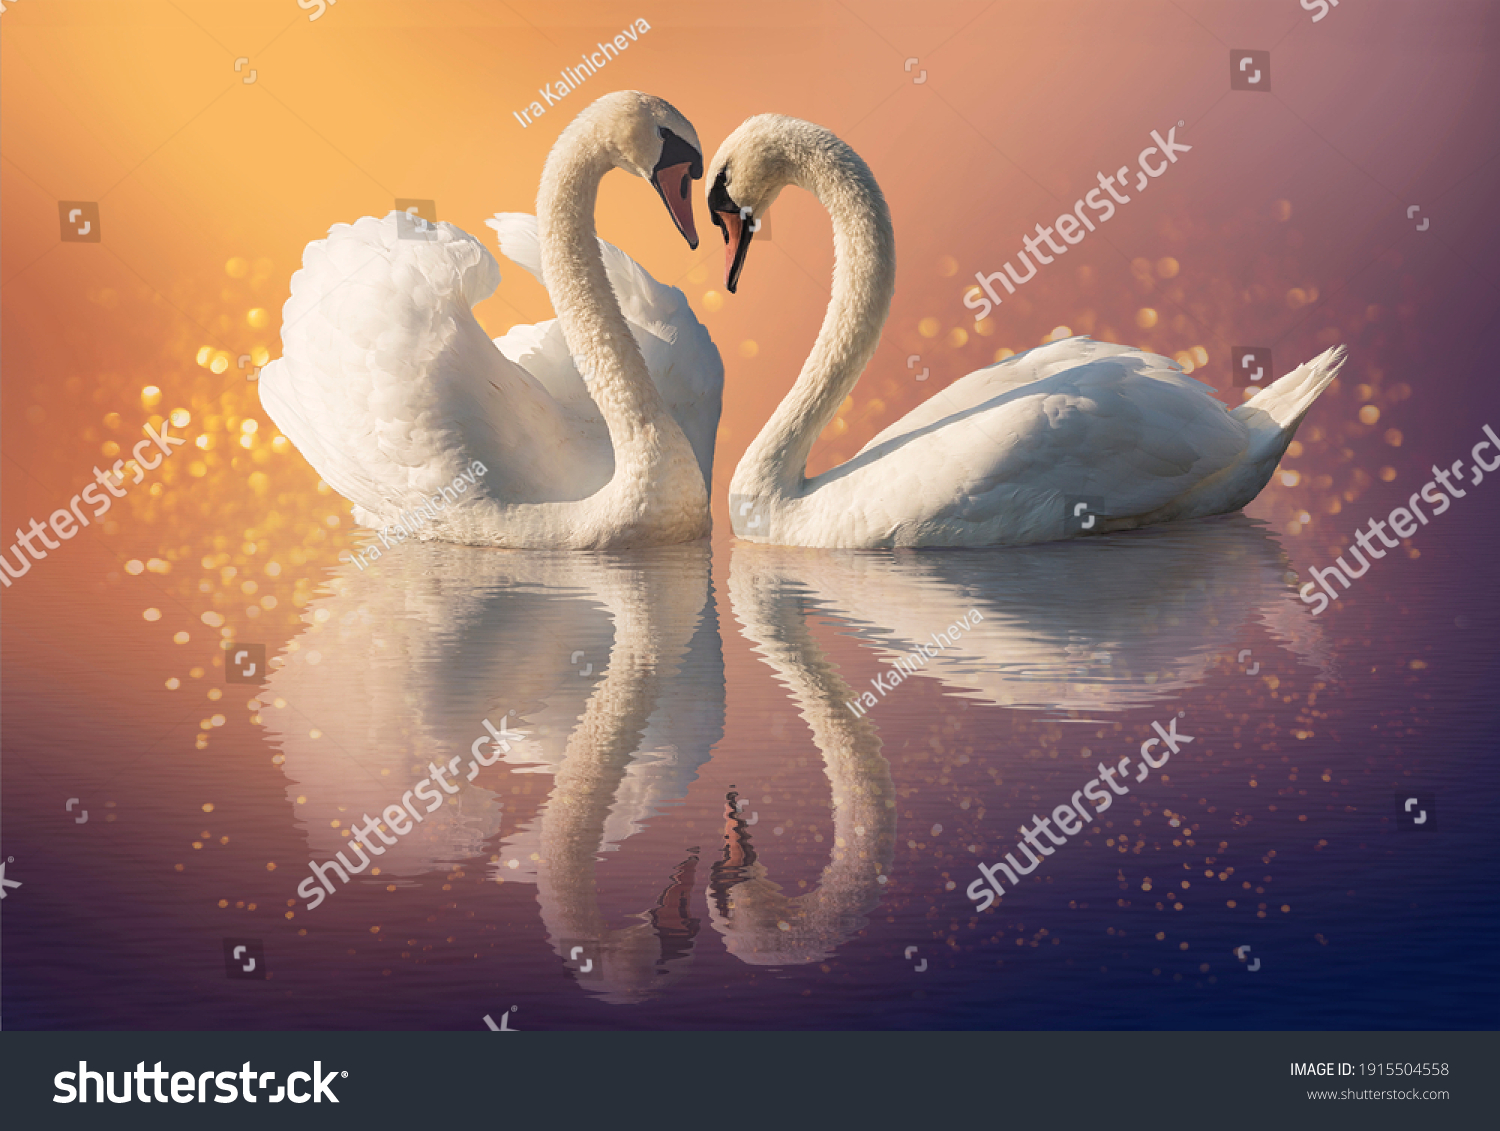 Couple of swans and reflection on the water #1915504558